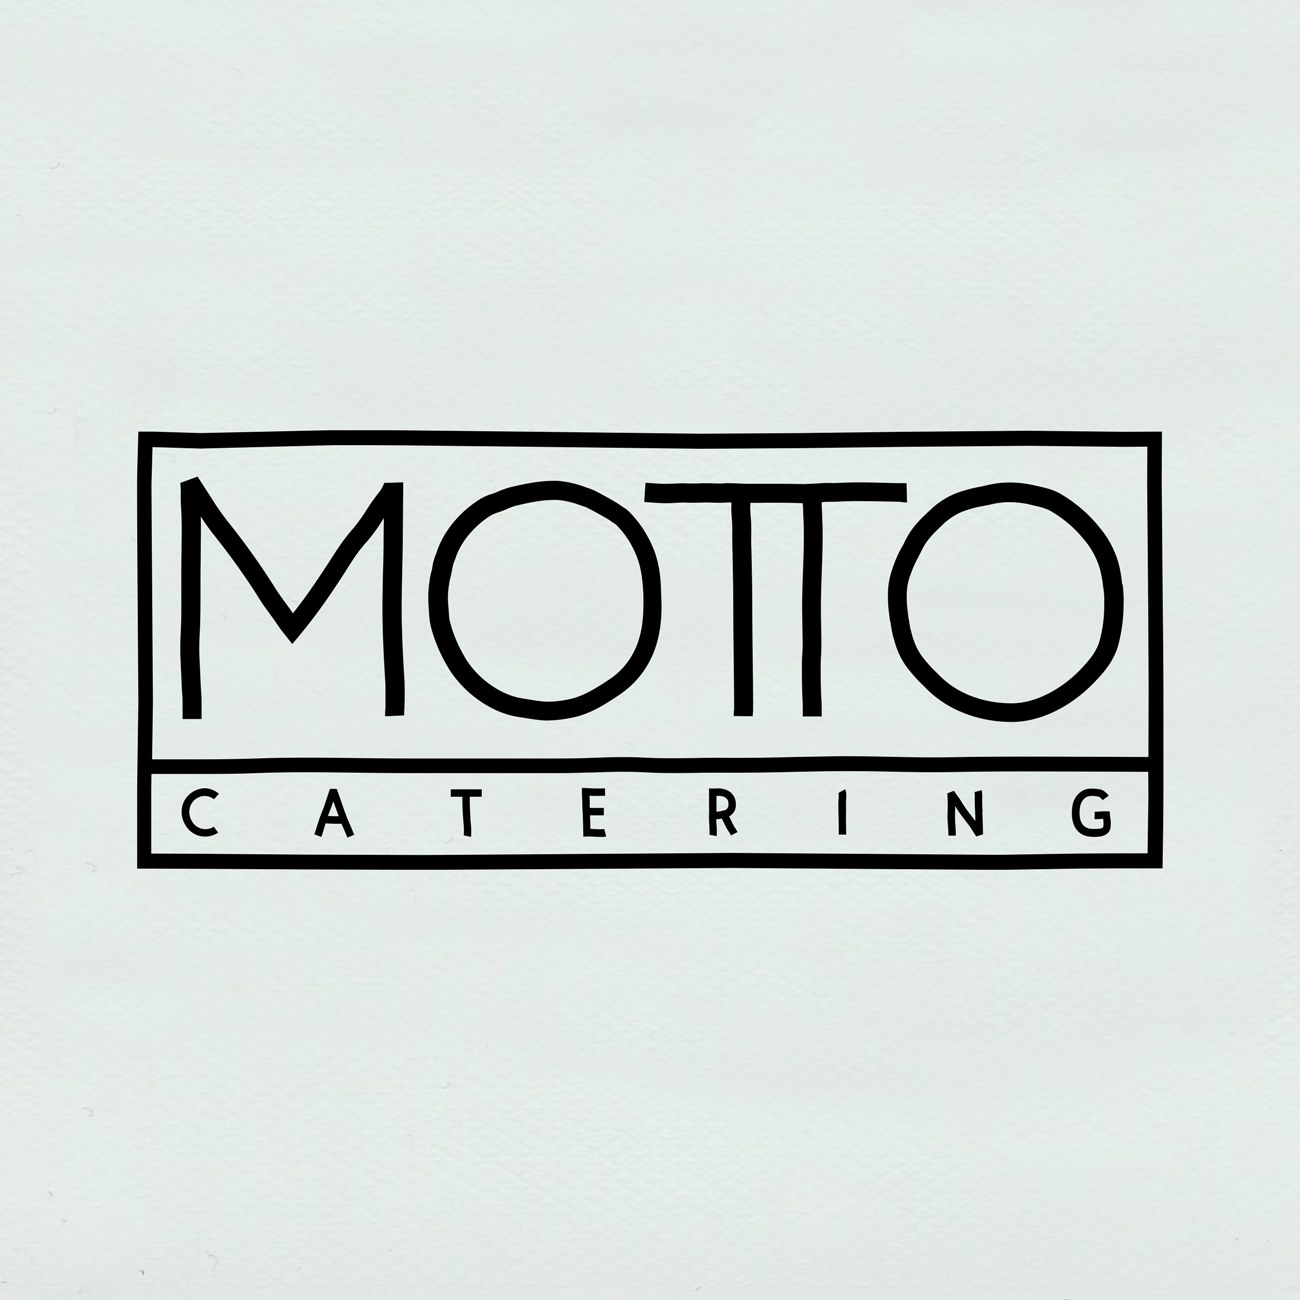 Motto Catering